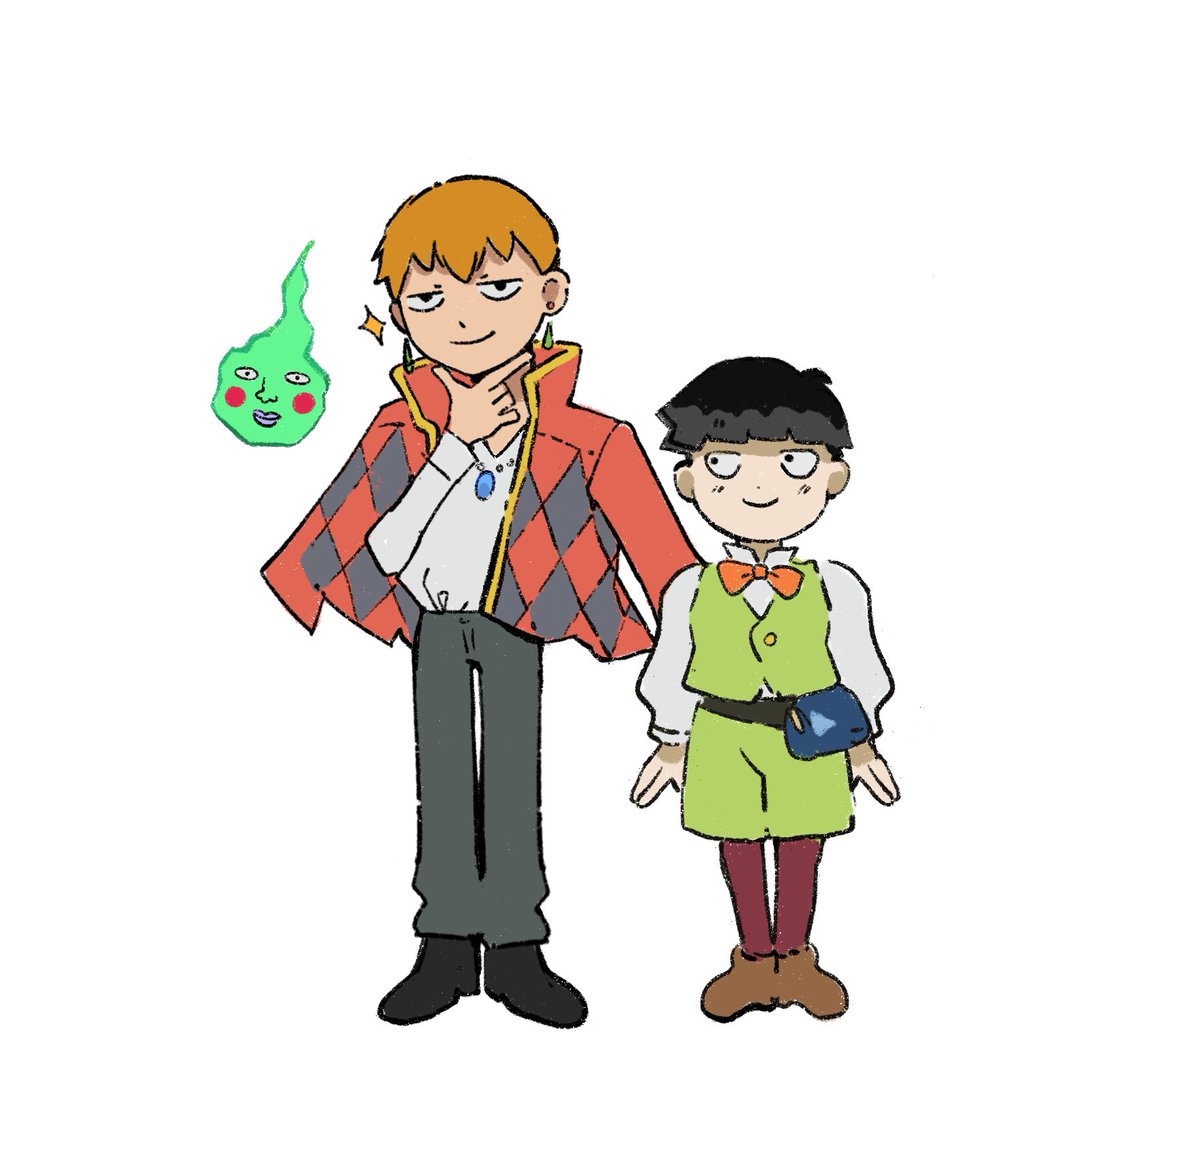 「Once again, Reigen's Moving Castle 」|Ibon 🎷🐛のイラスト